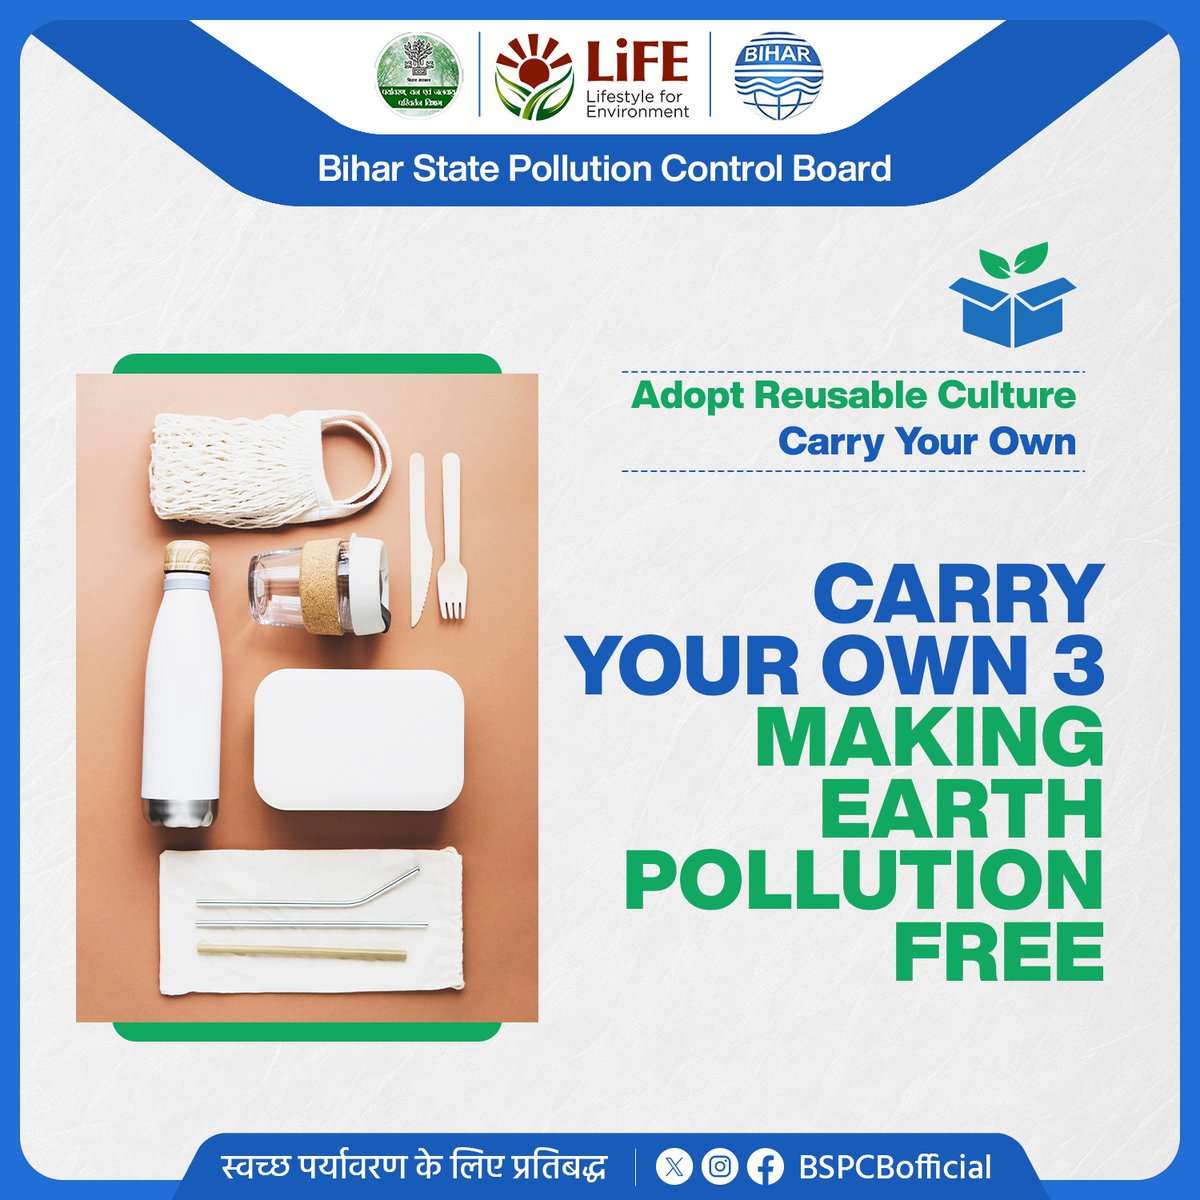 🌍 Carry Your Own 3: Making Earth Pollution-Free! 🌍

Reusable Bags 🛍️
Water Bottles 💧
Coffee Cups ☕
Let's reduce waste and protect our planet by using reusable products. Every little effort counts!
#PollutionFree #ReusableProducts #EcoFriendly #Sustainability #GreenLiving 🌱♻️